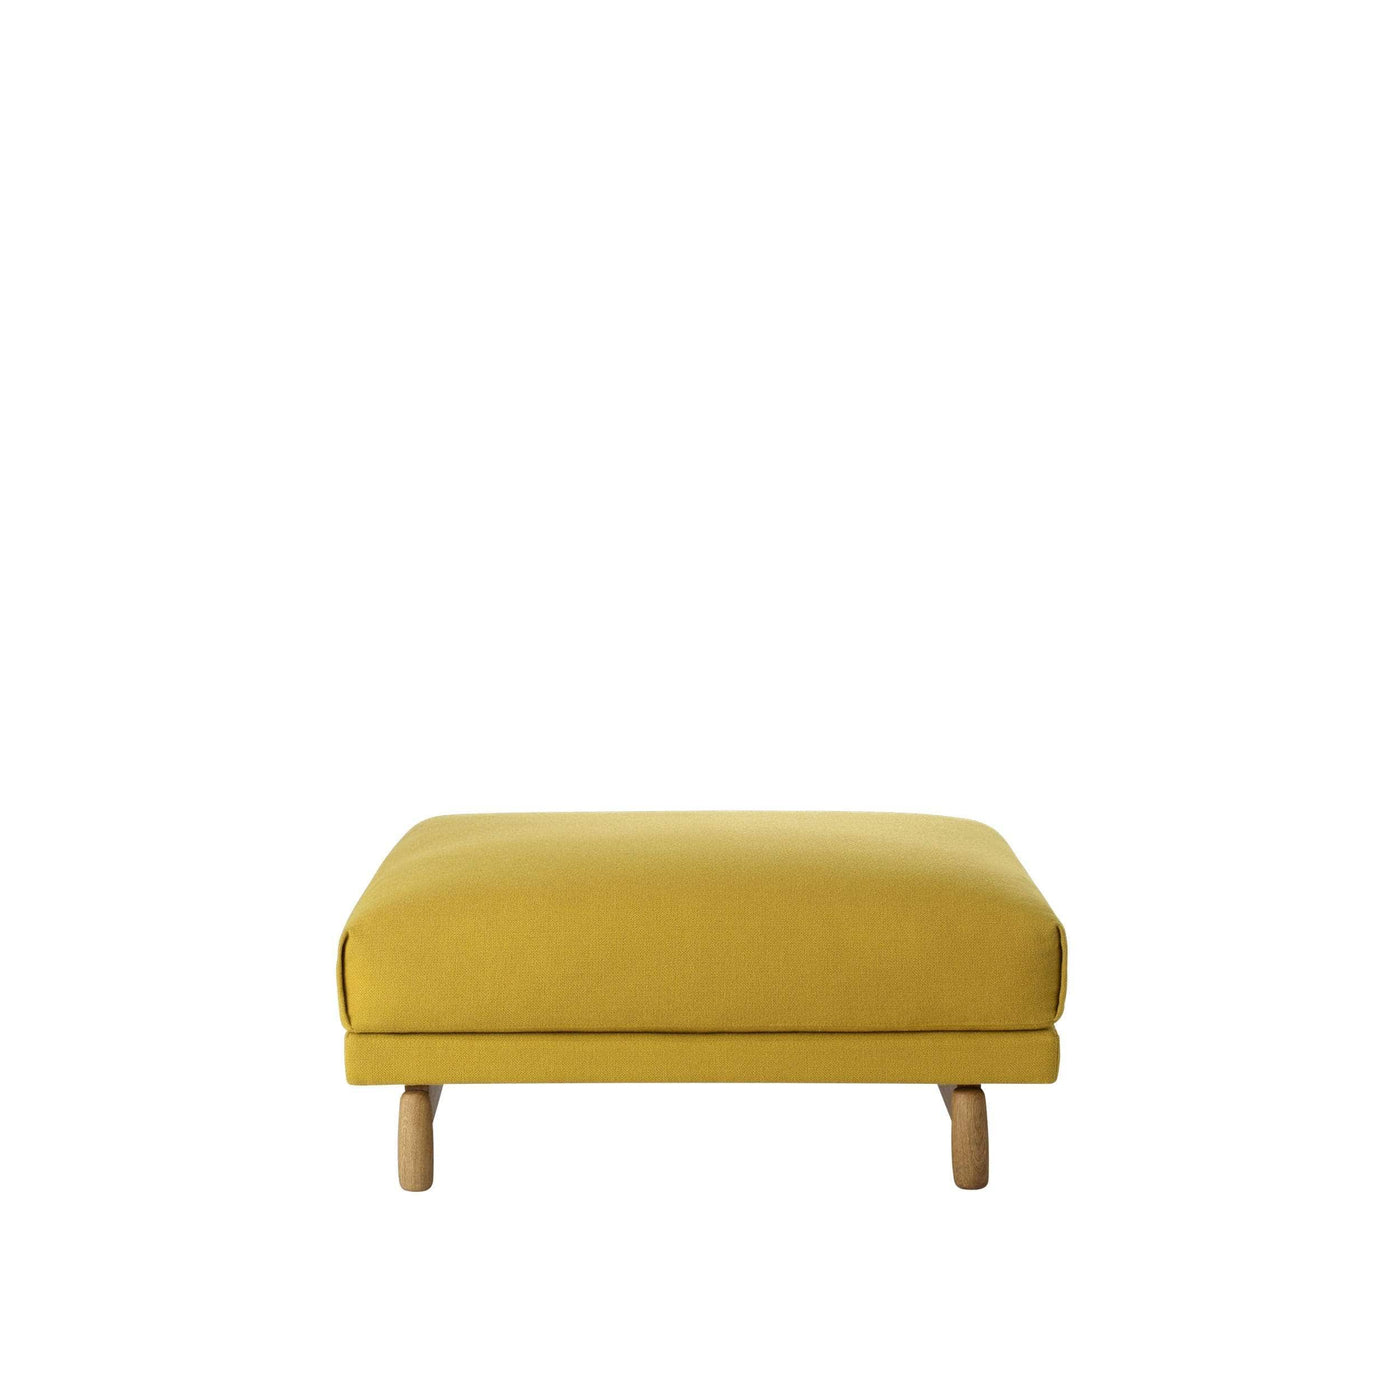 Hallingdal 457 by Kvadrat. Yellow upholstery fabric made to order for Muuto Outline & Rest sofas. Order free fabric swatches at someday designs.